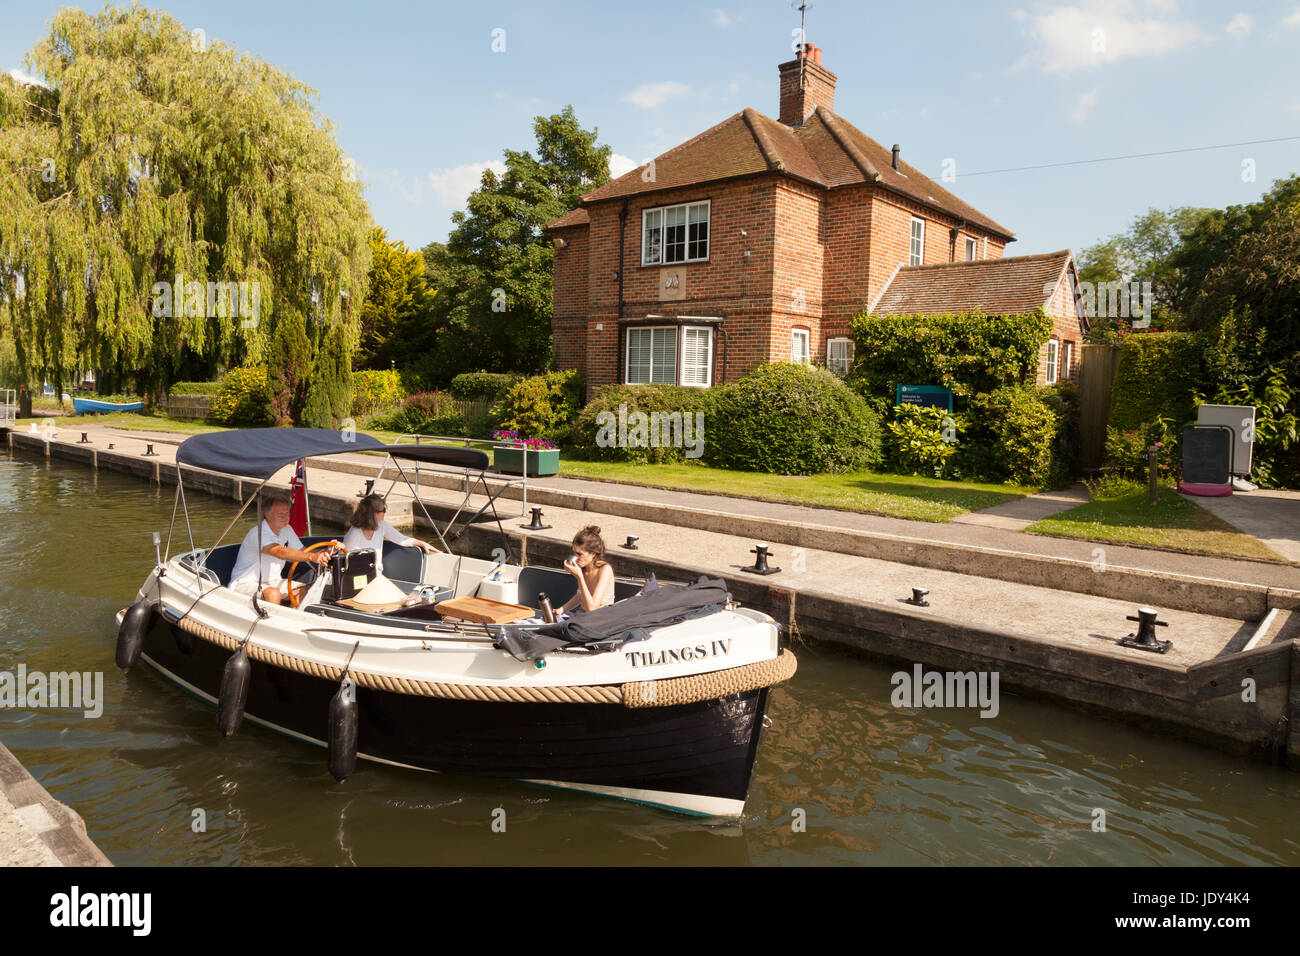 River Thames Oxfordshire; - A boat in Shiplake Lock, on the River Thames, Oxfordshire England UK Stock Photo